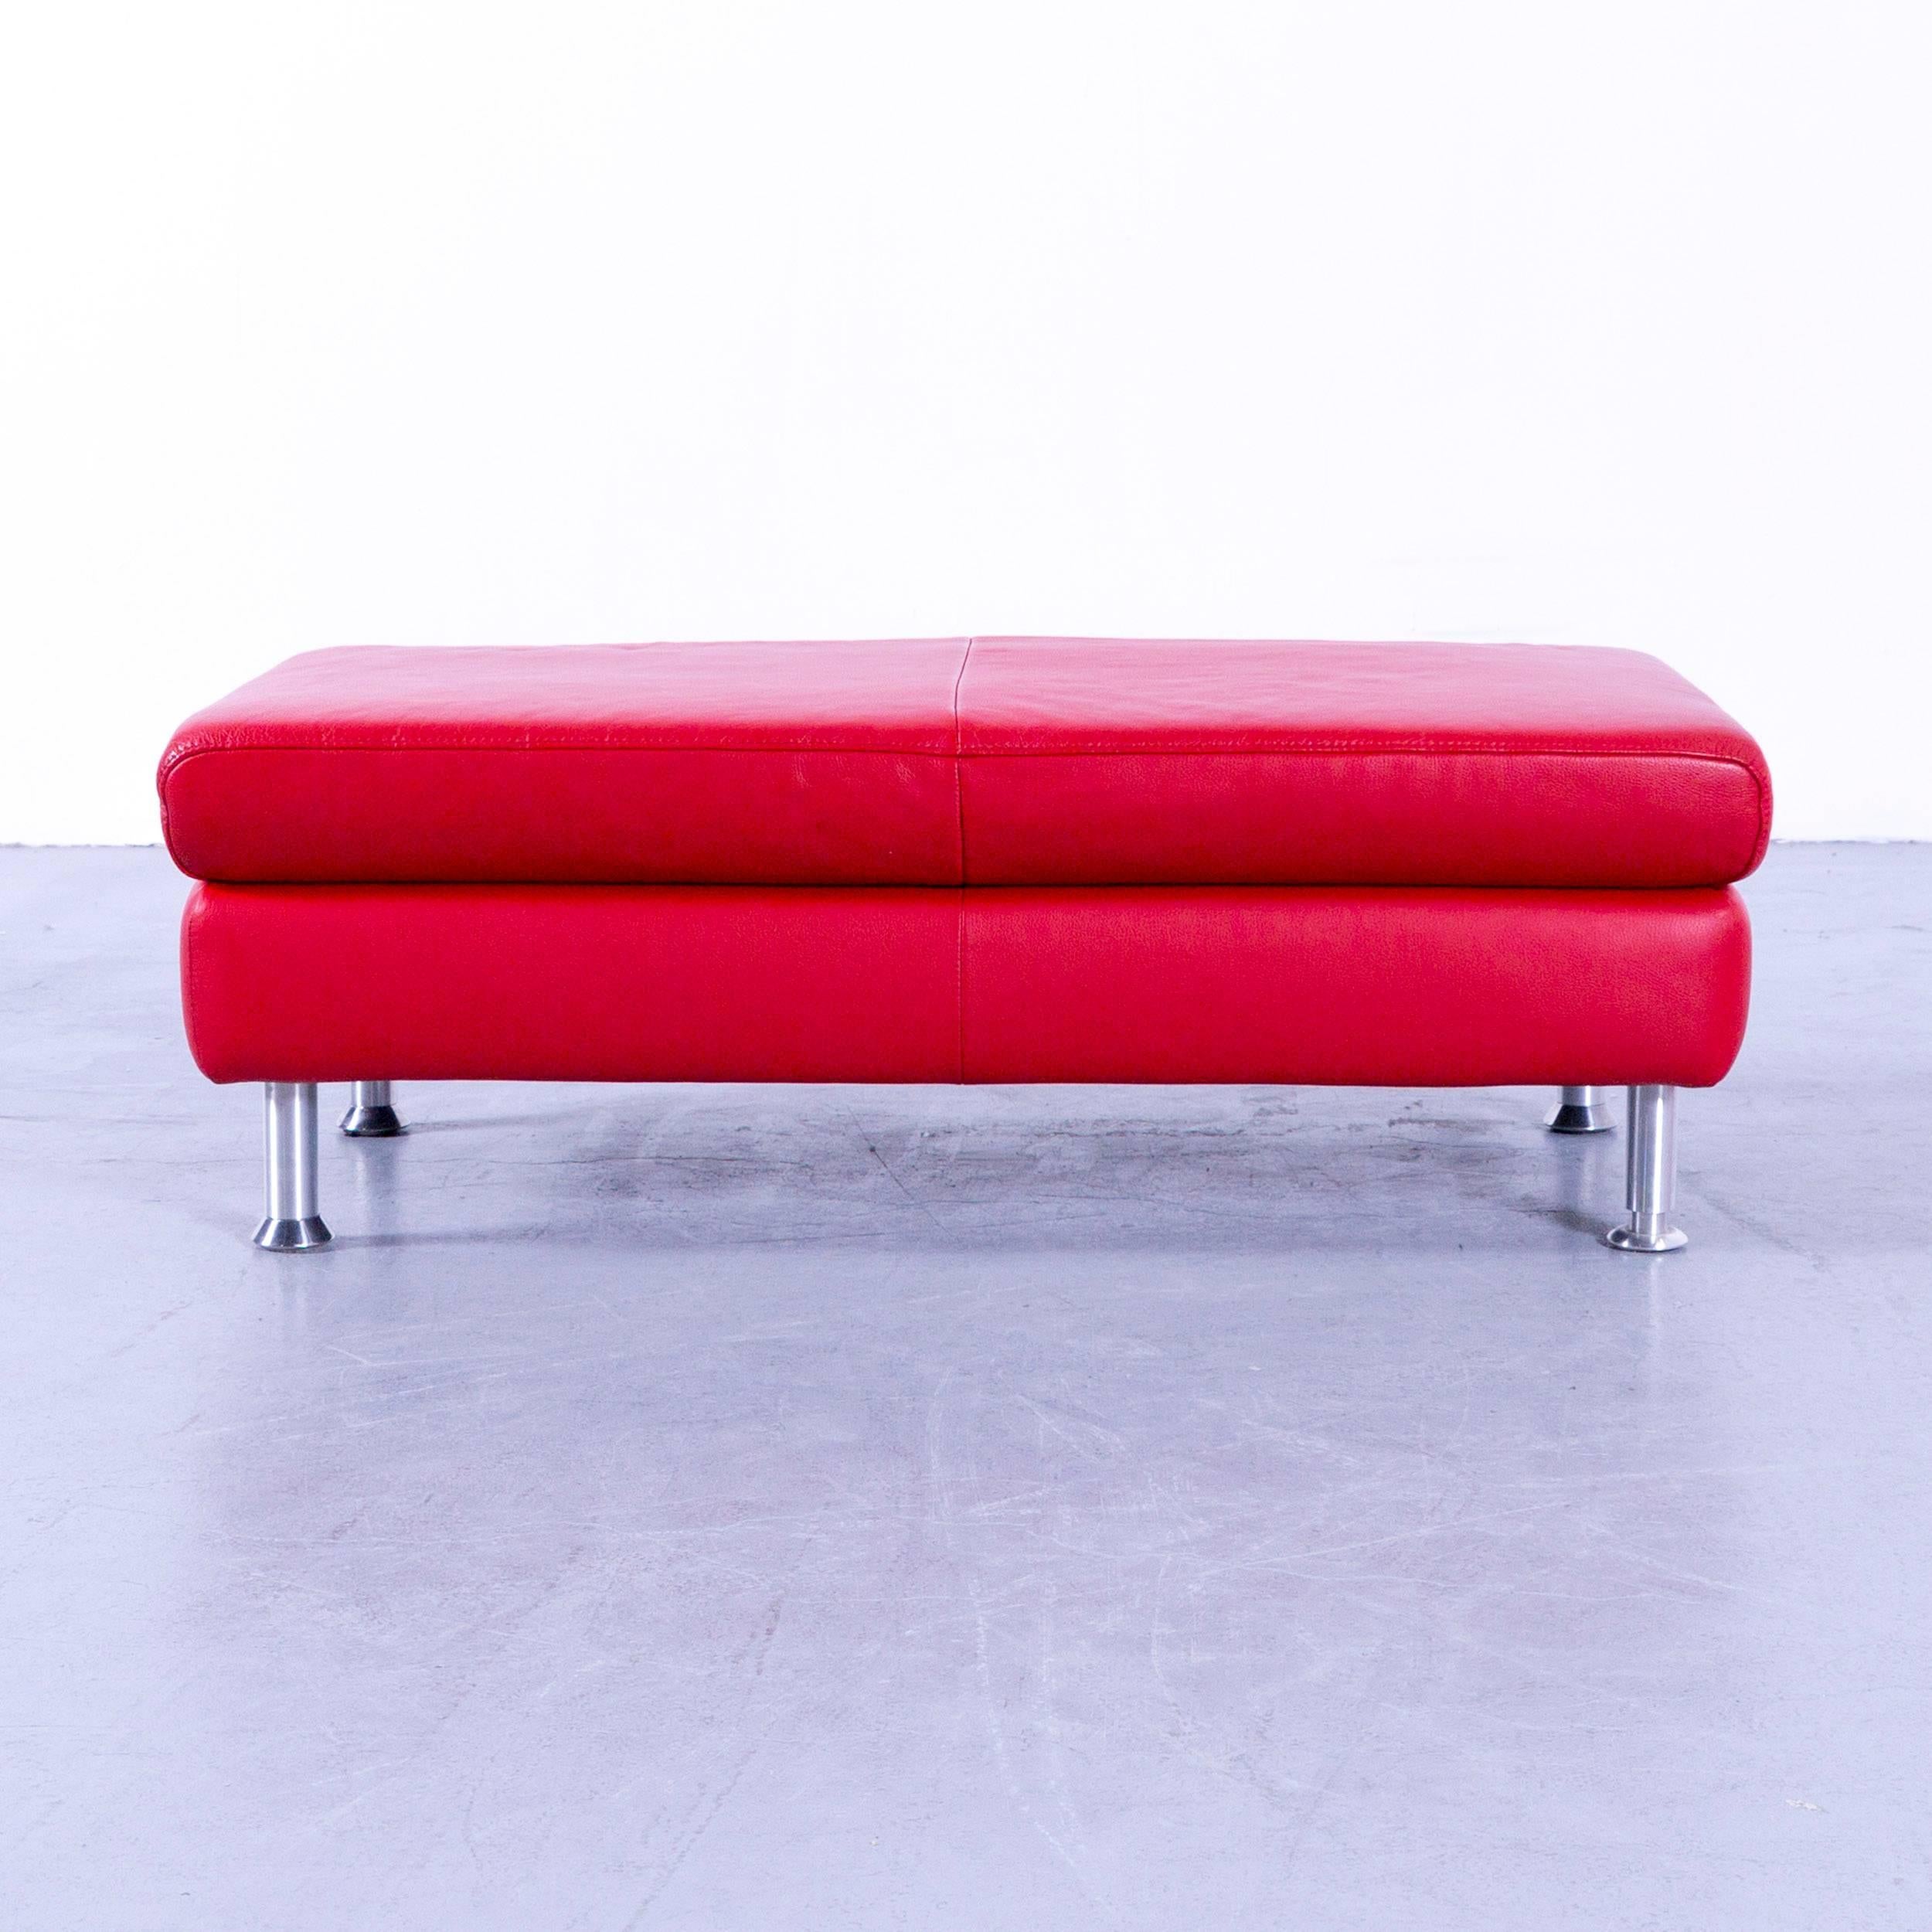 German Willi Schillig Designer Leather Foot Stool Red Pouff Modern Couch For Sale